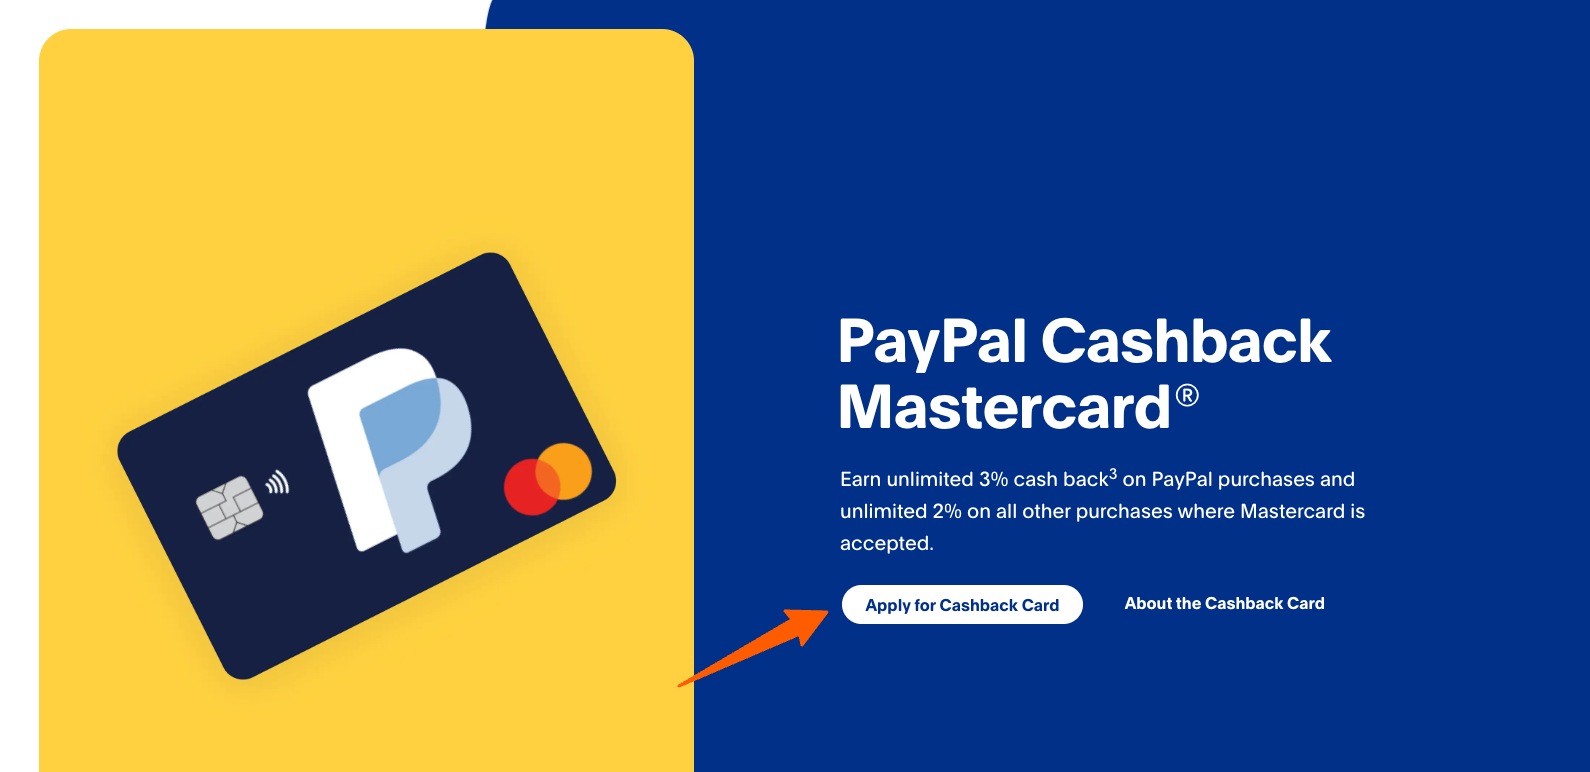 Apply for PayPal Cashback Mastercard